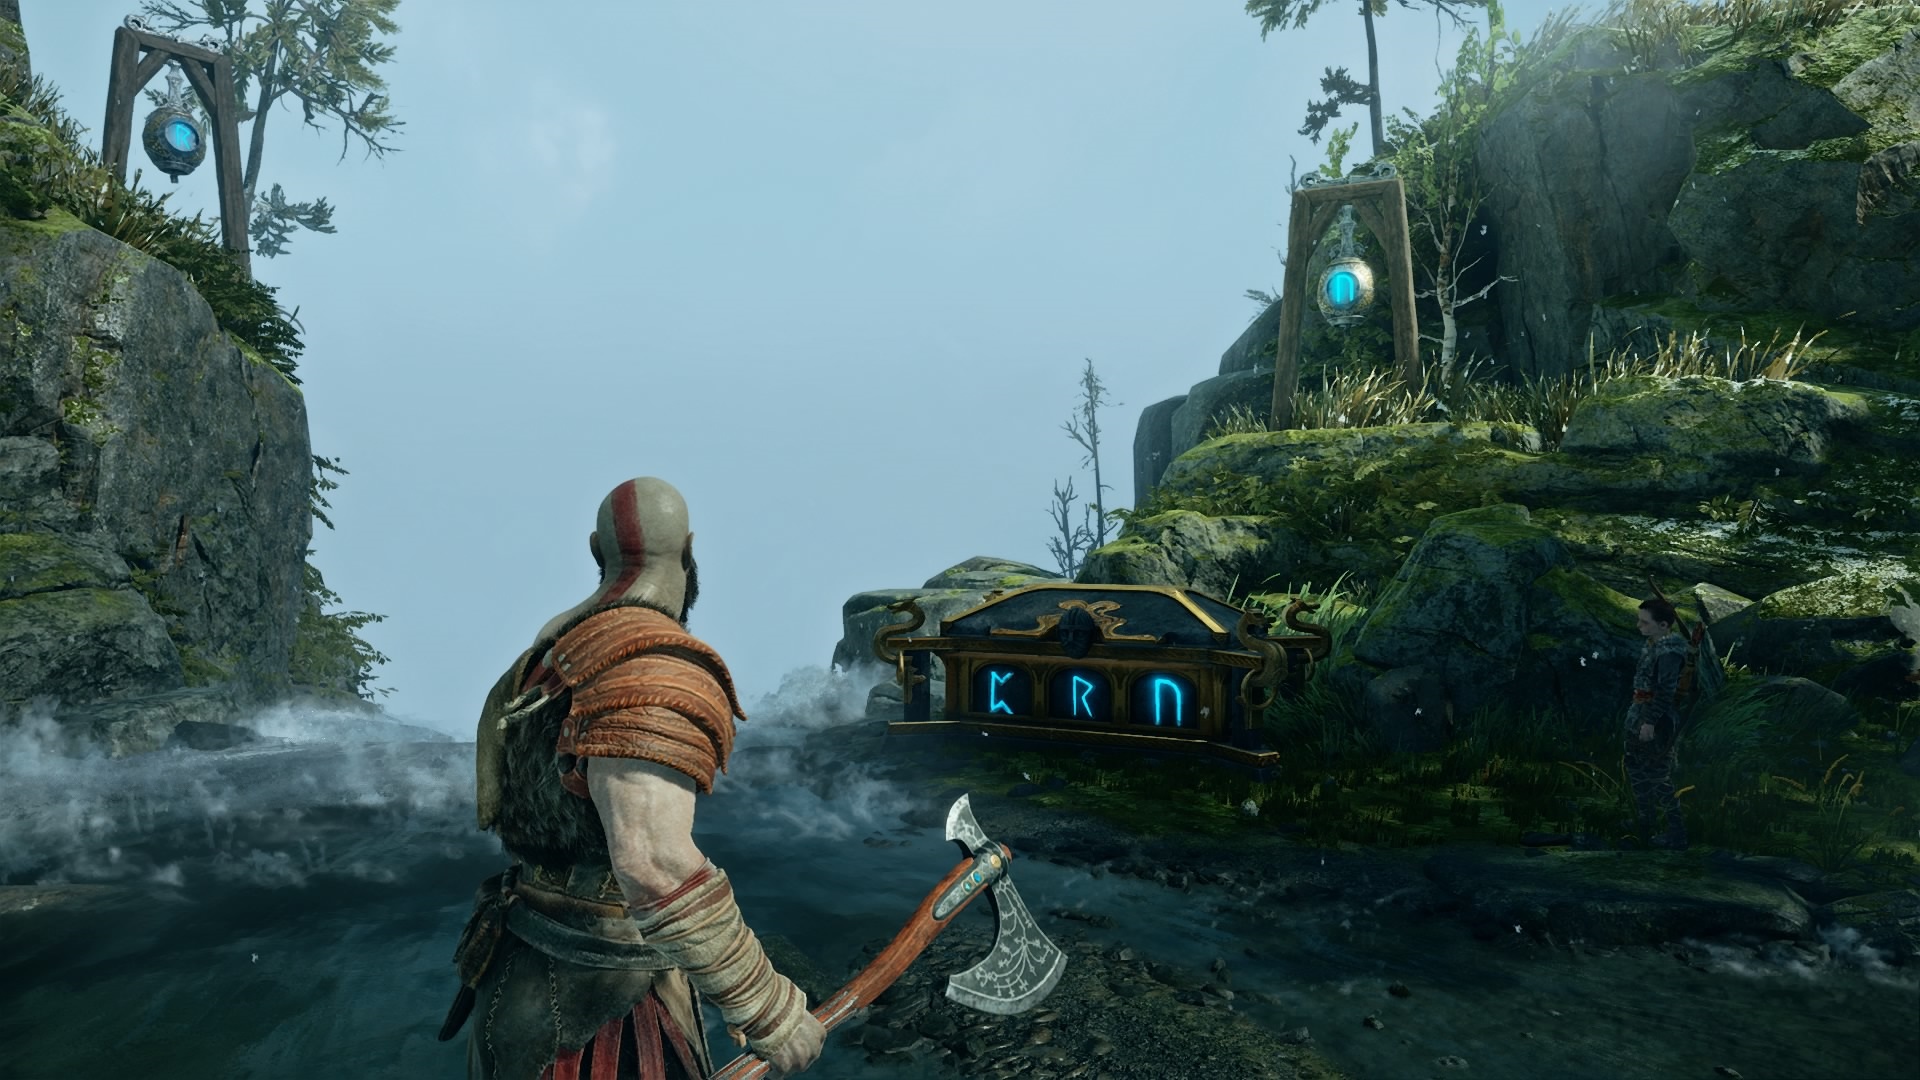 god of war nornir chests collectibles guide 4 fire troll arena